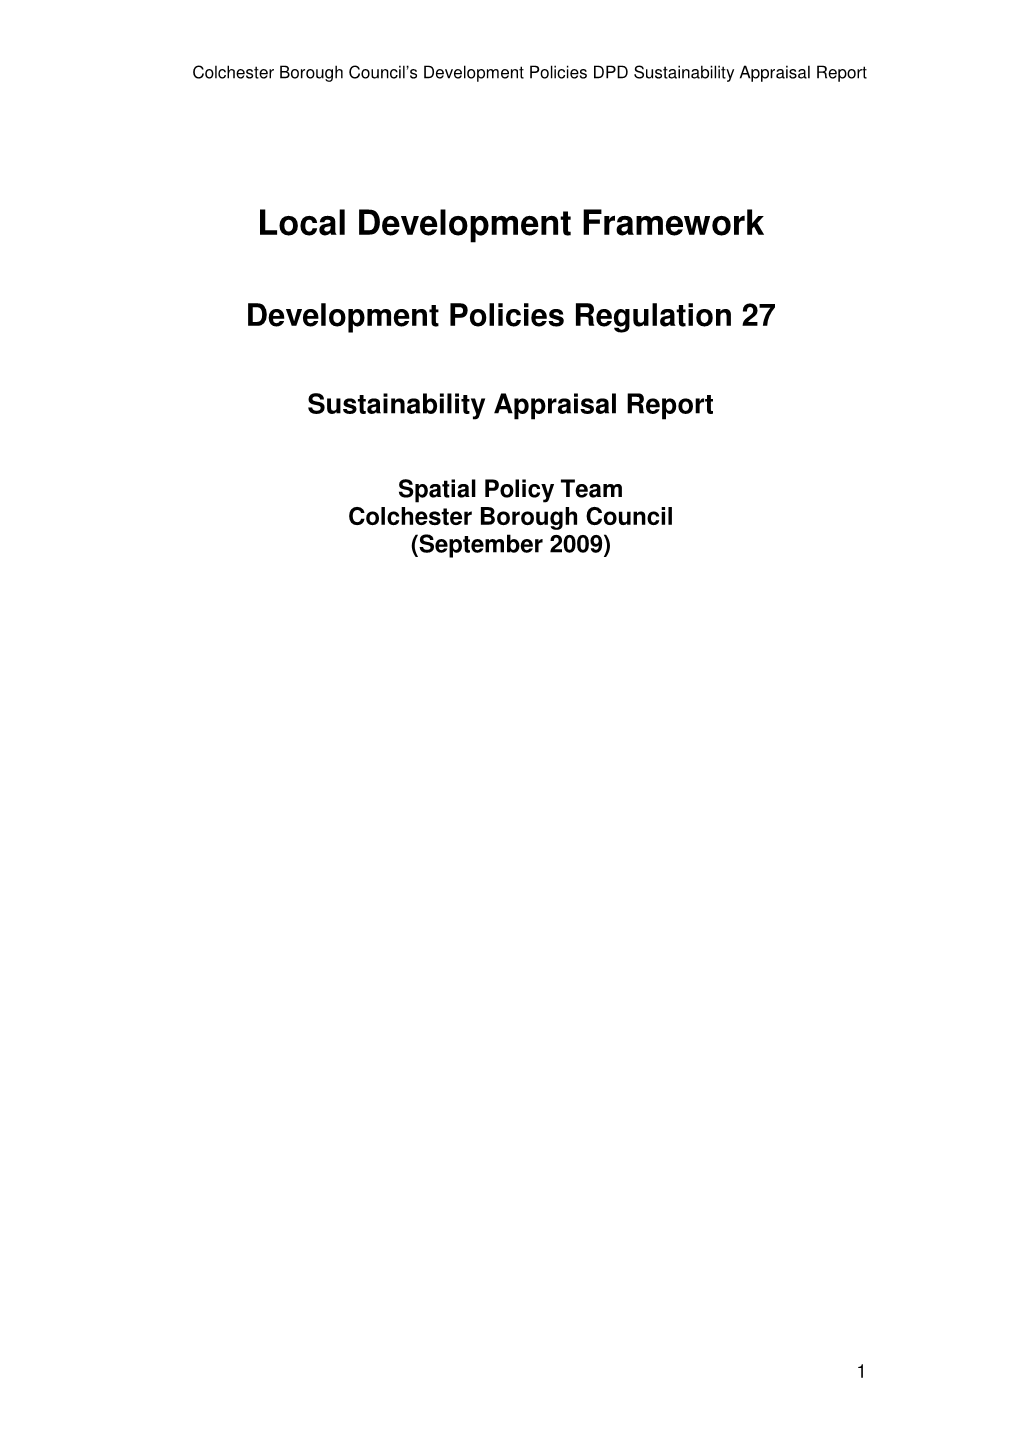 DC Policies Reg 27 Sustainability Appraisal Report